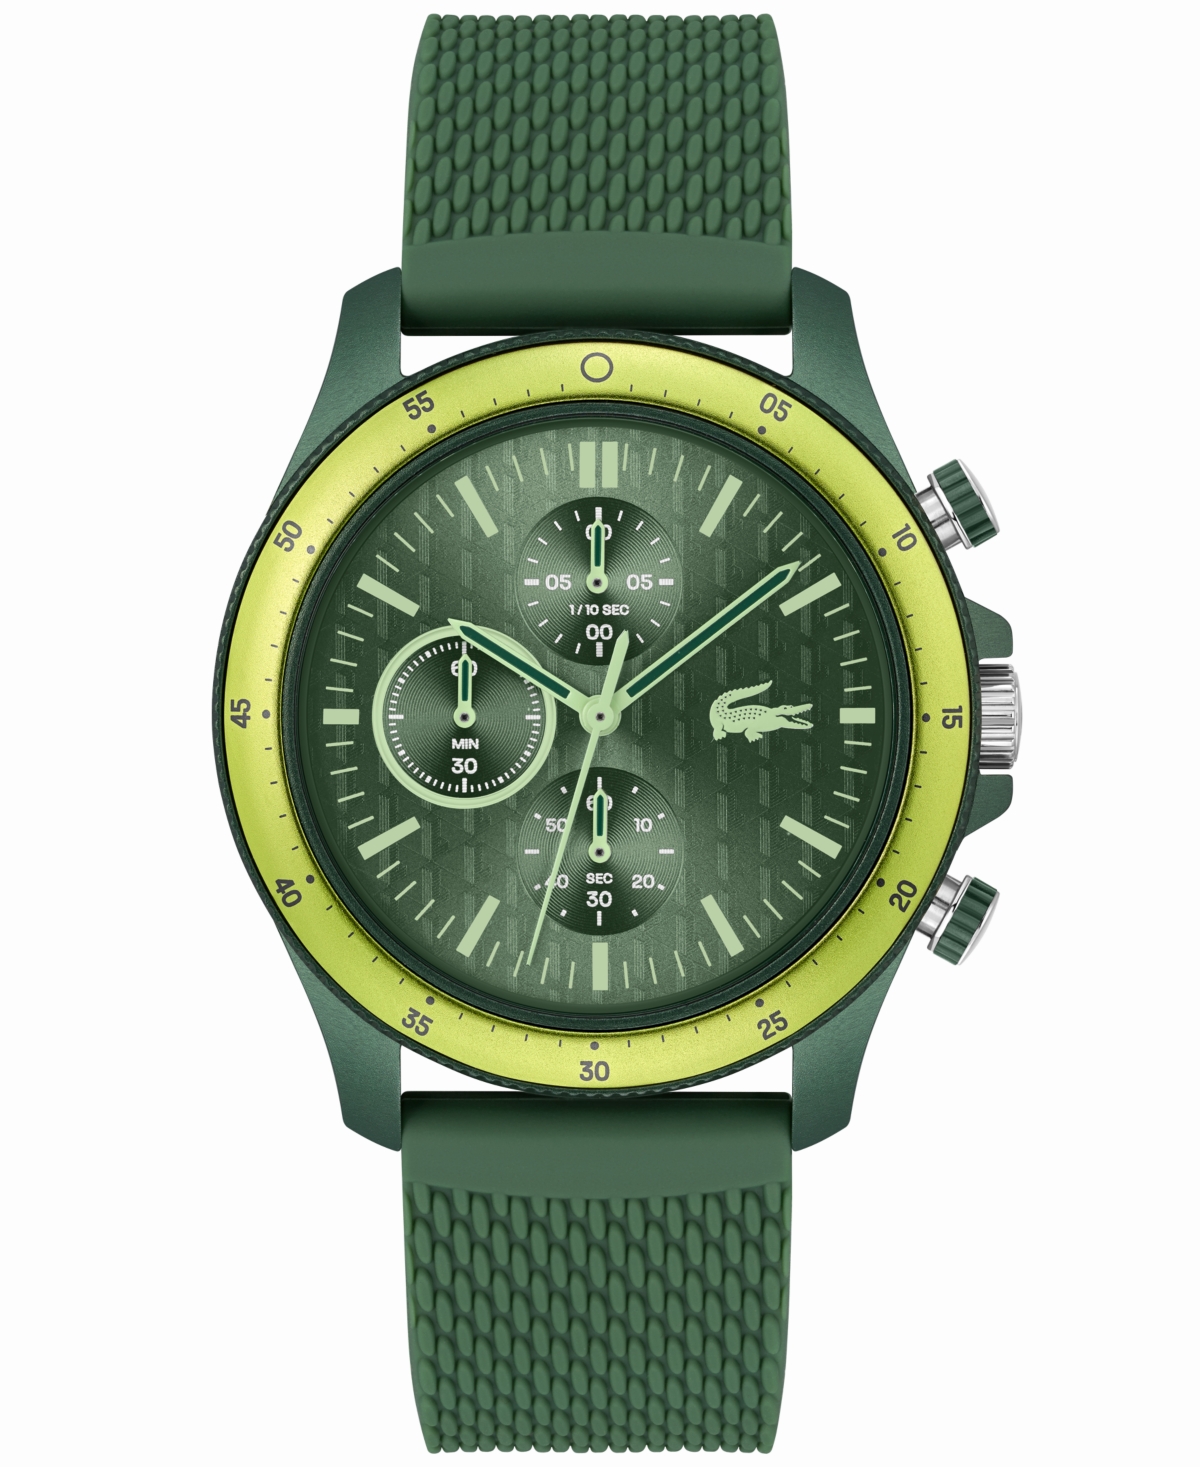 Men's Neoheritage Chronograph Green Silicone Strap Watch 42mm - Green